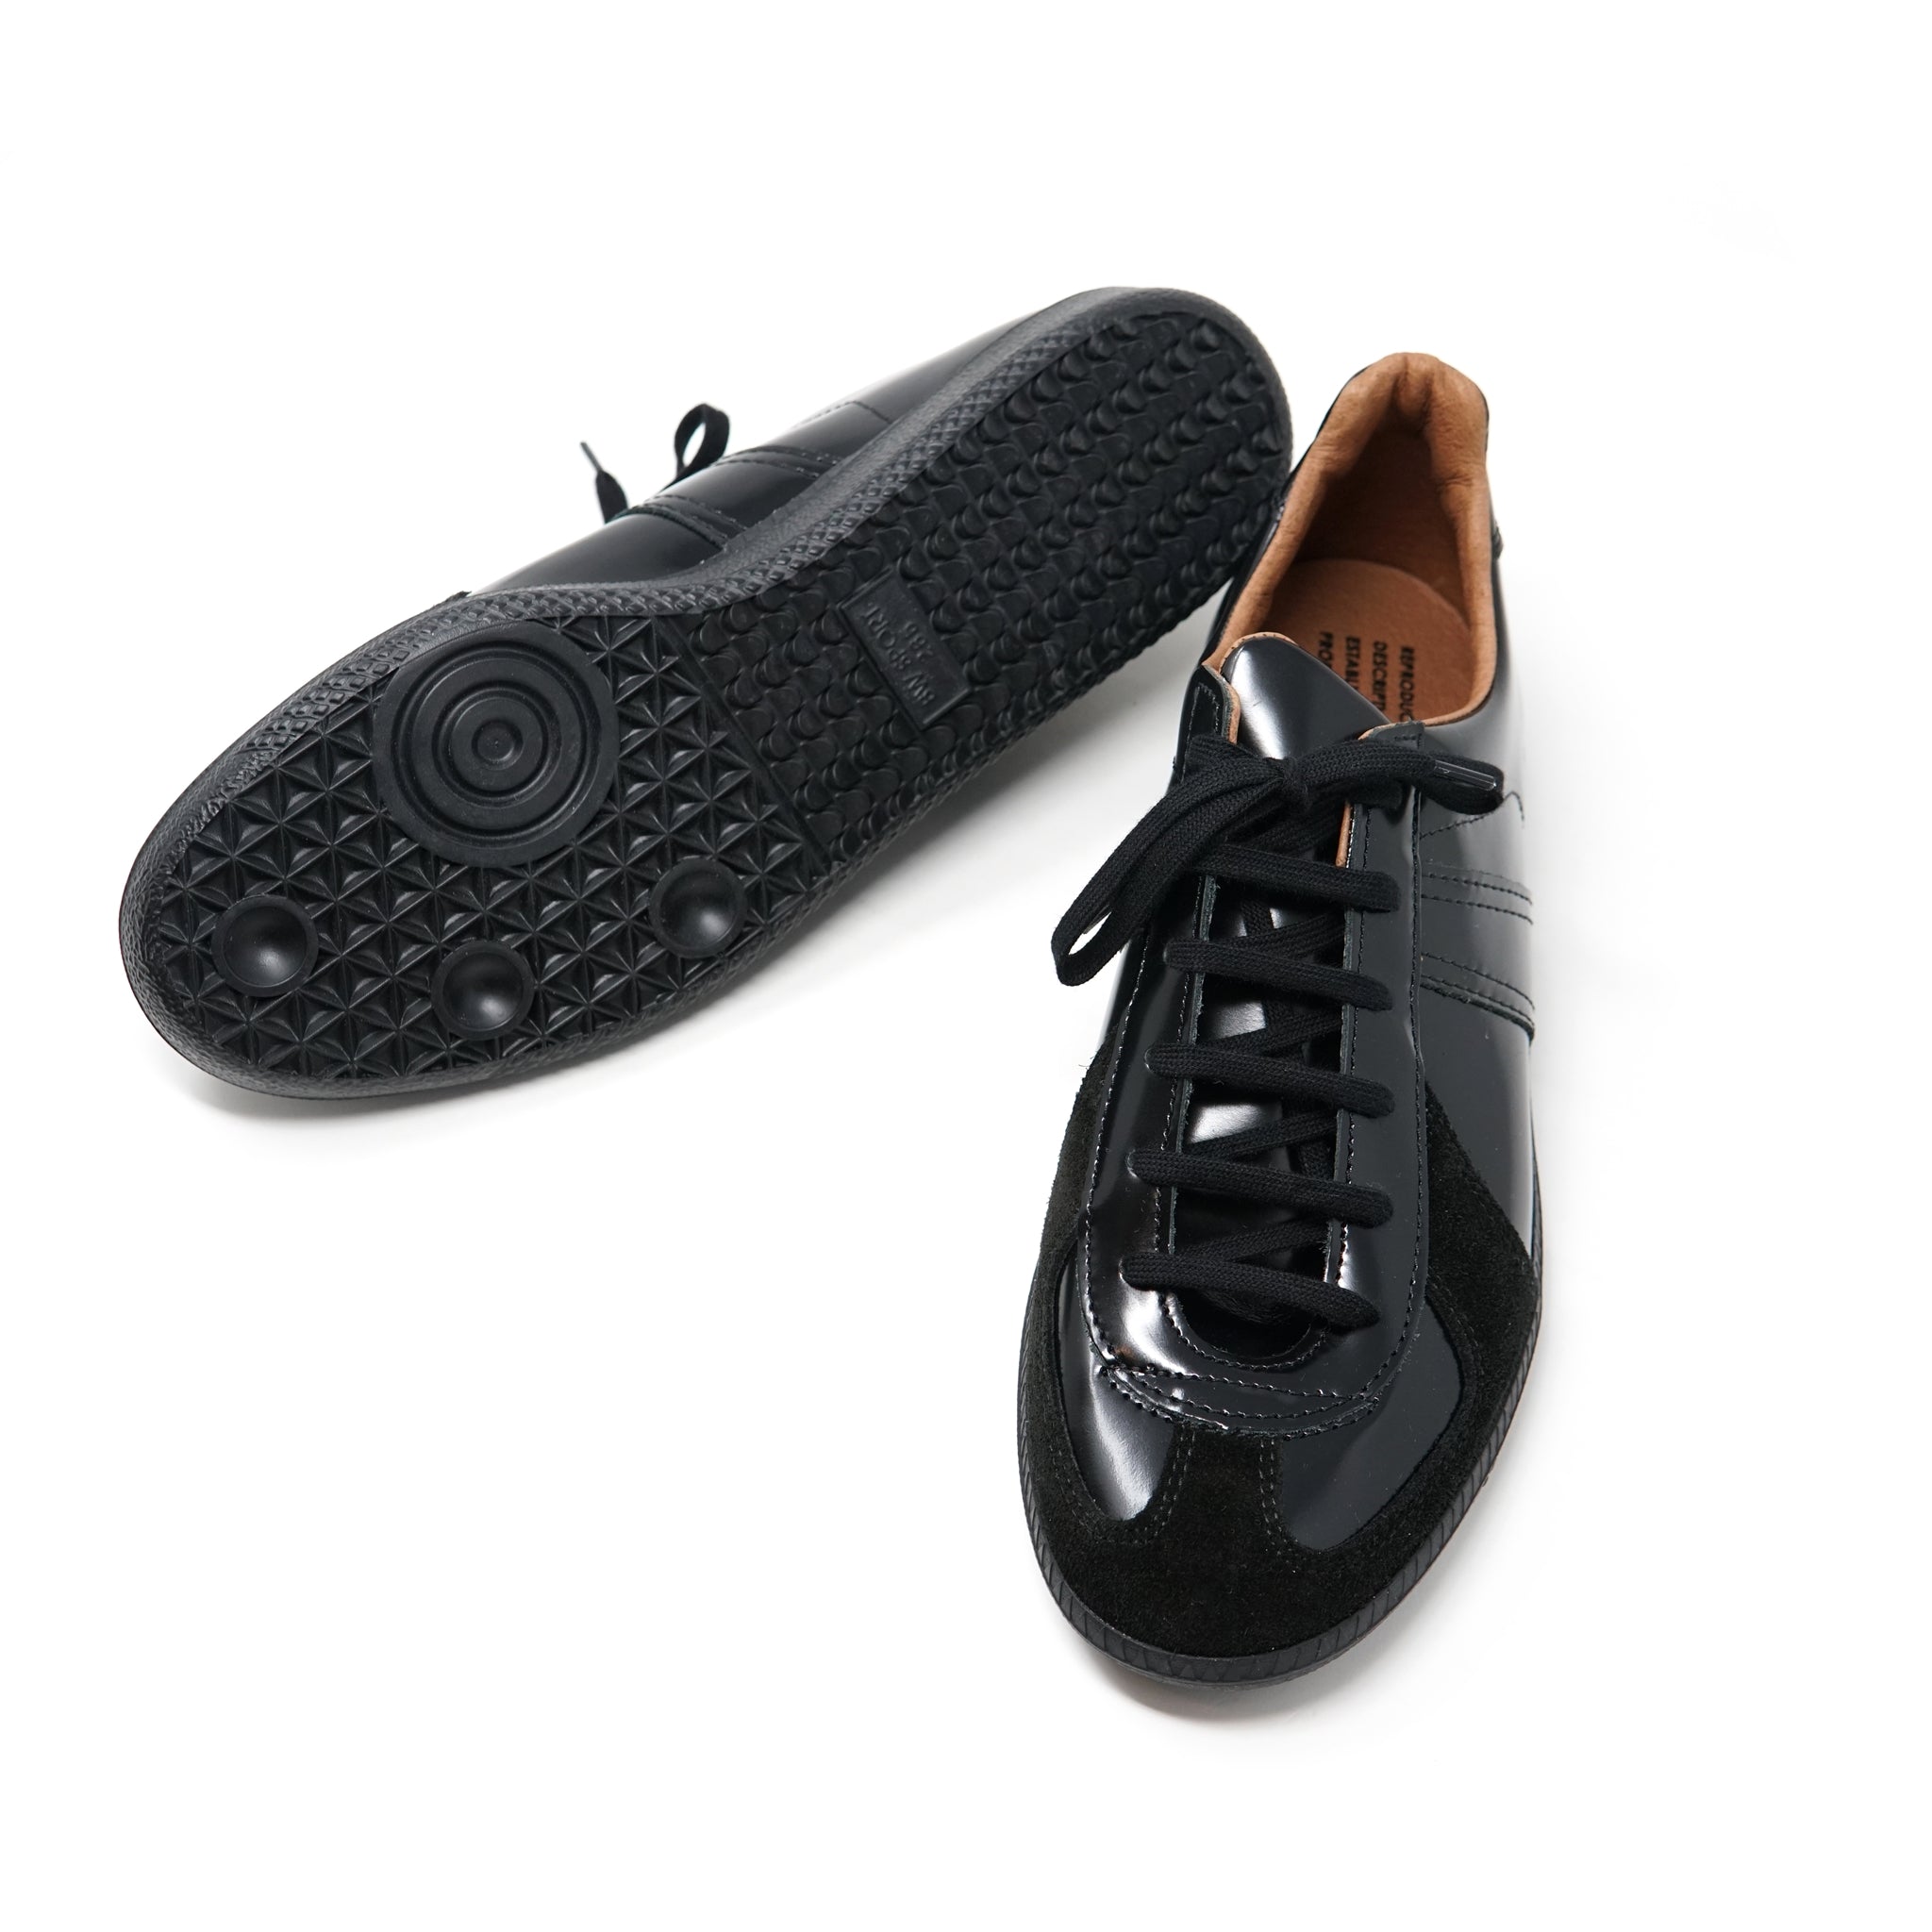 No:1700lux | Name:GERMAN MILITARY TRAINER | Color:Black 